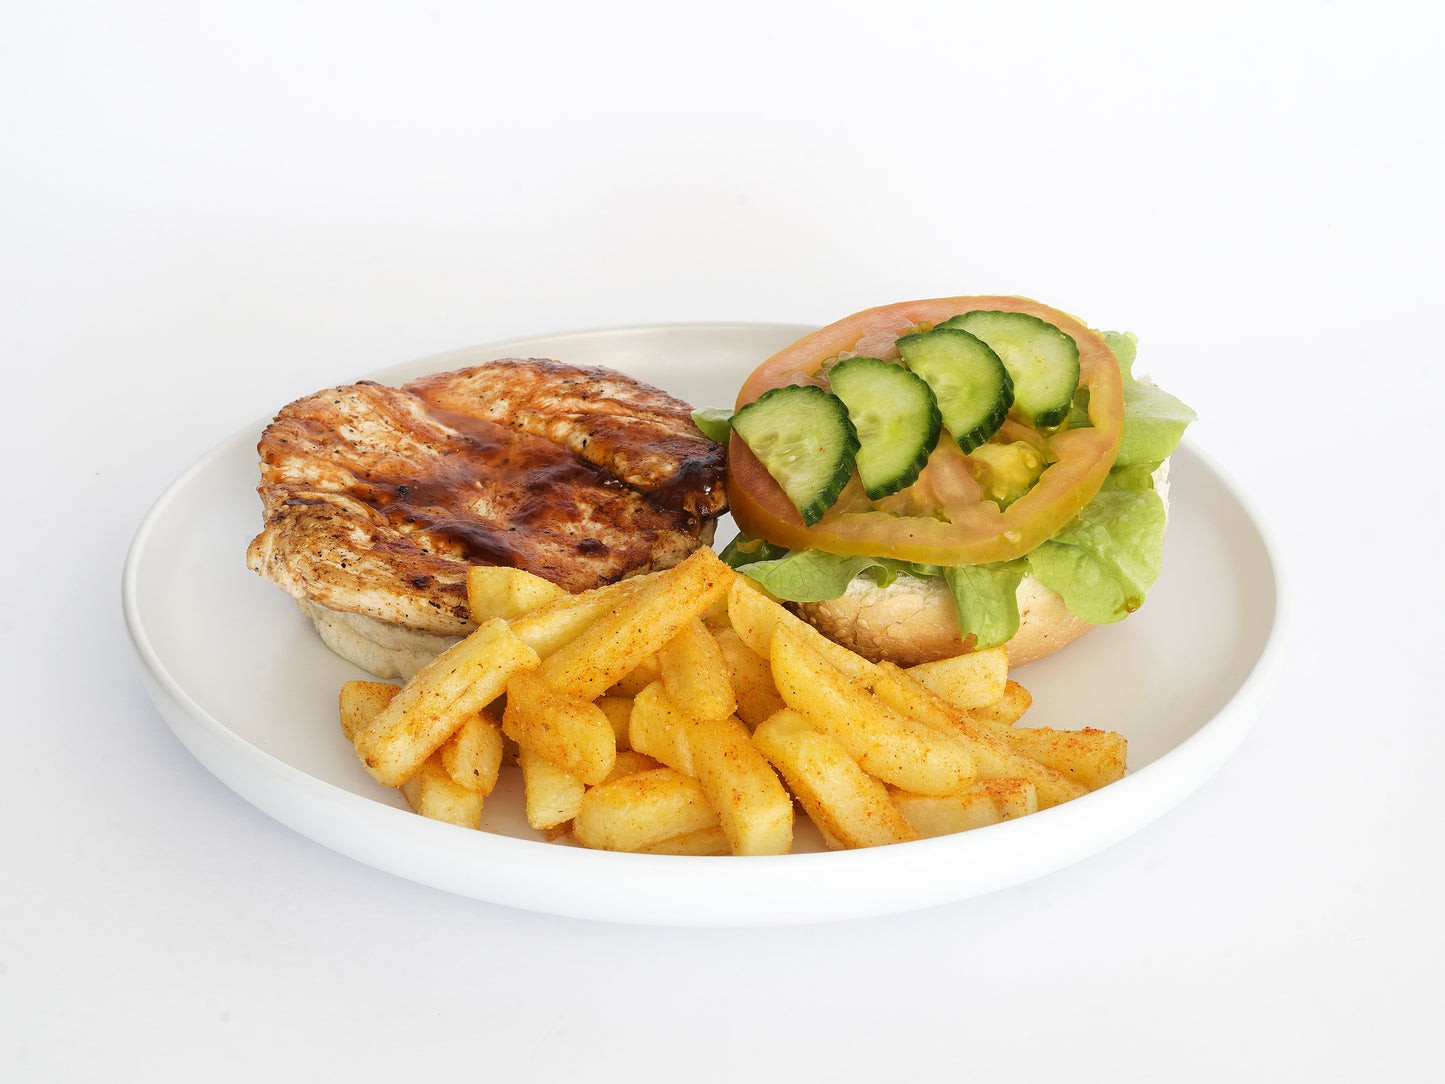 Chicken Burger and Chips